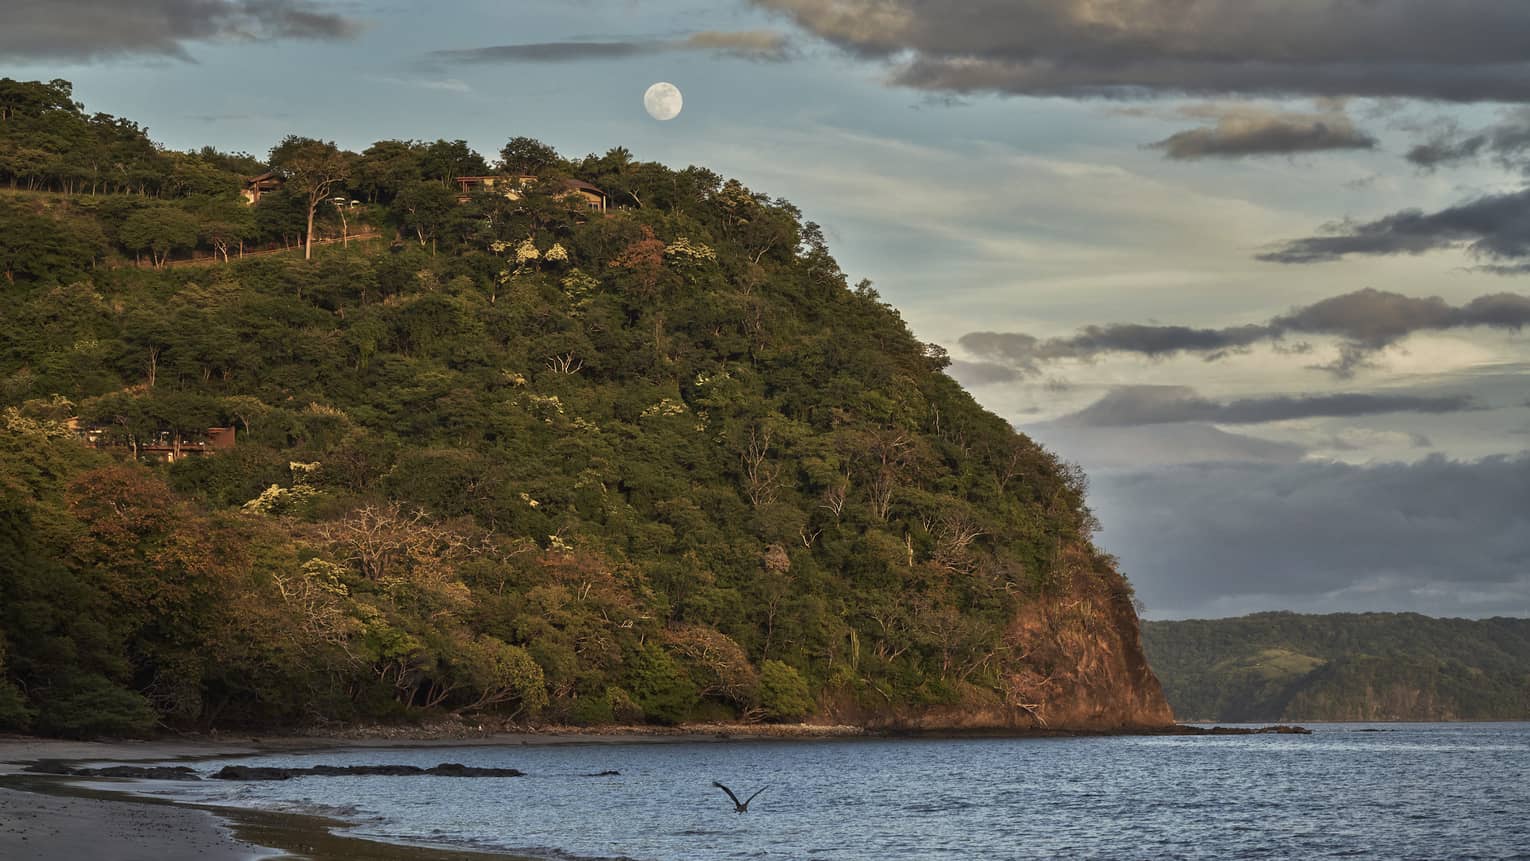 A full moon rises above a seaside cliff in a blue, daytime sky